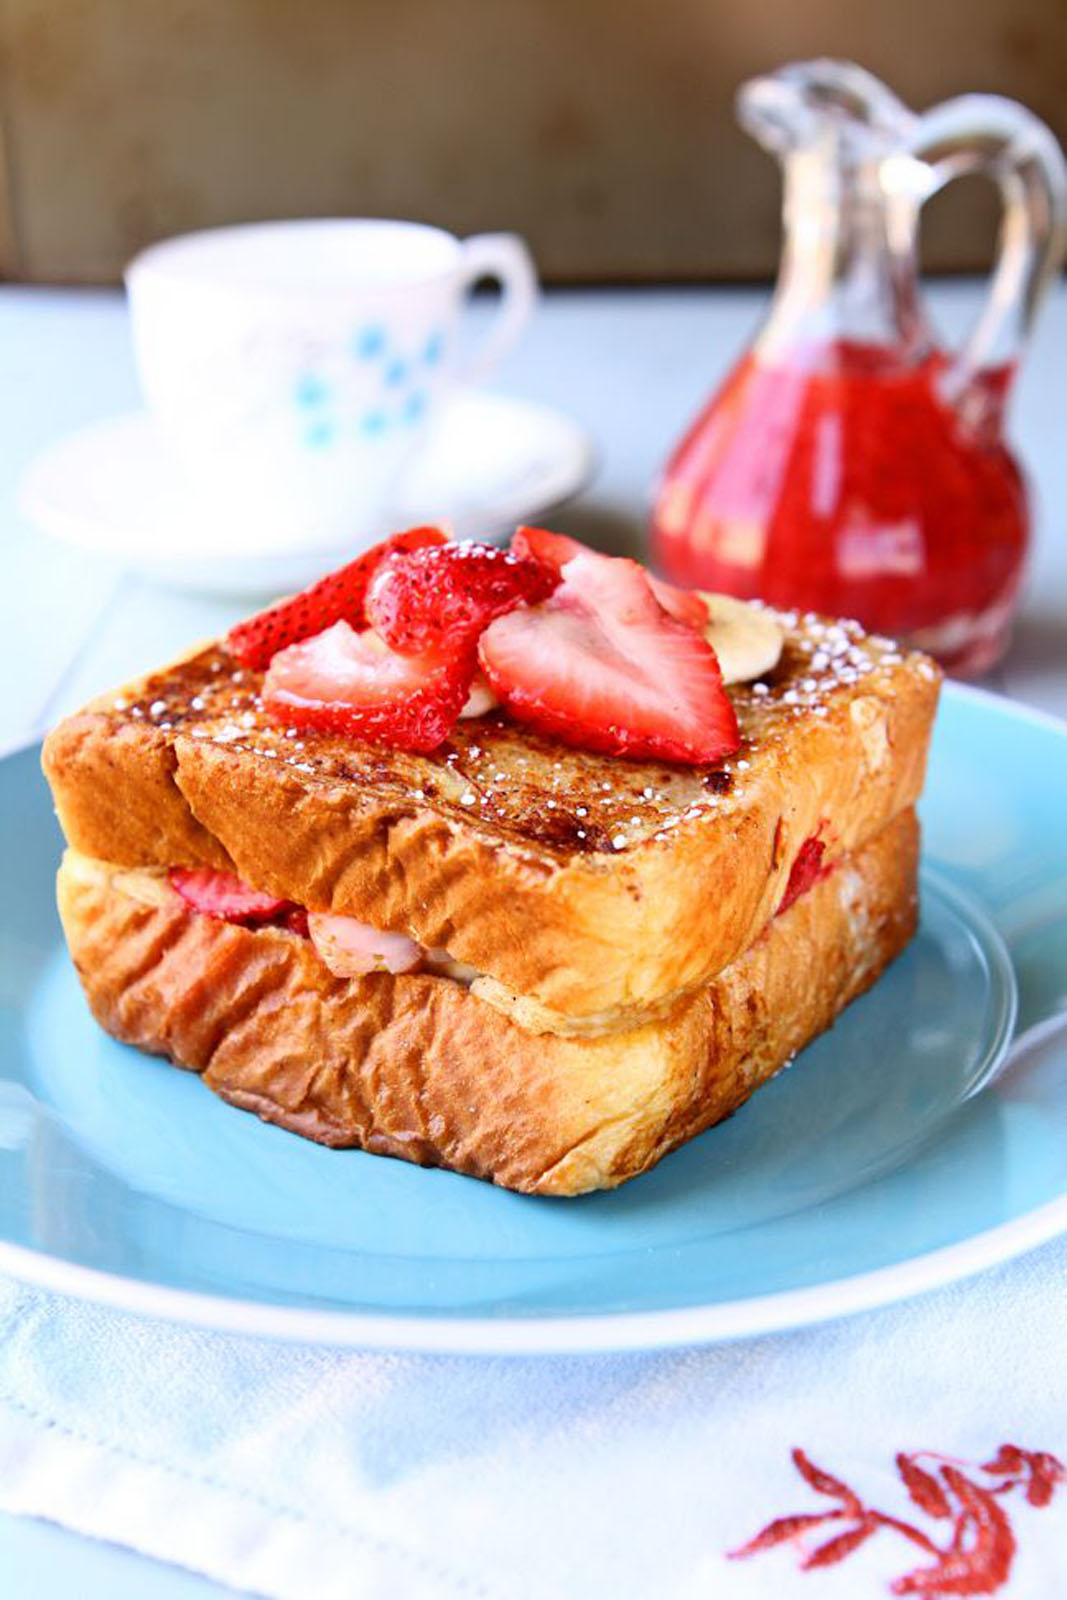 Stuffed French toast on a blue plate